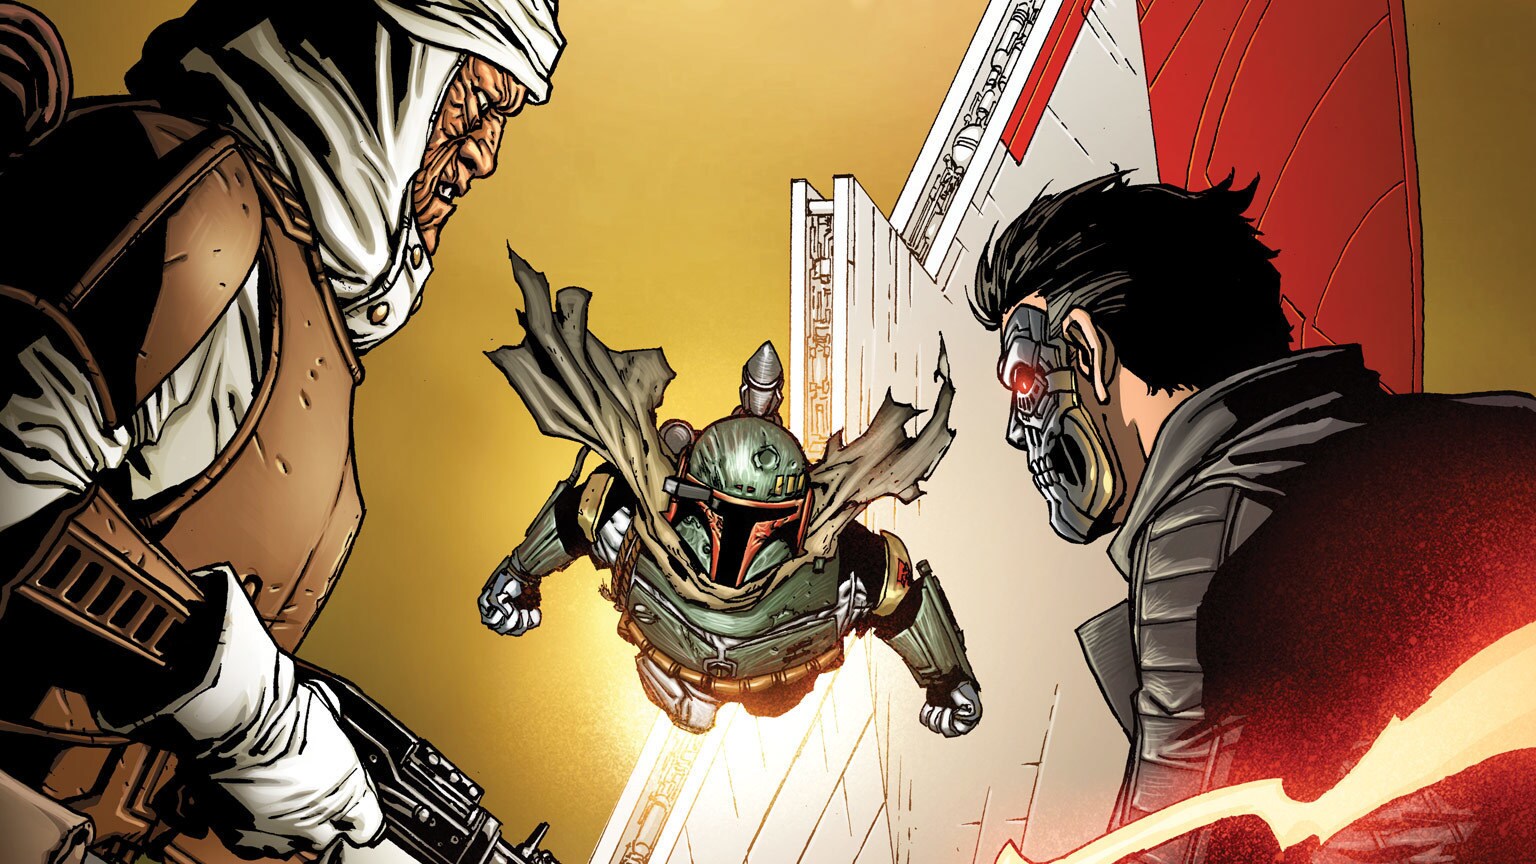 Beilert Valance Faces His Destiny in Marvel's Star Wars: Bounty Hunters #16 - Exclusive Preview